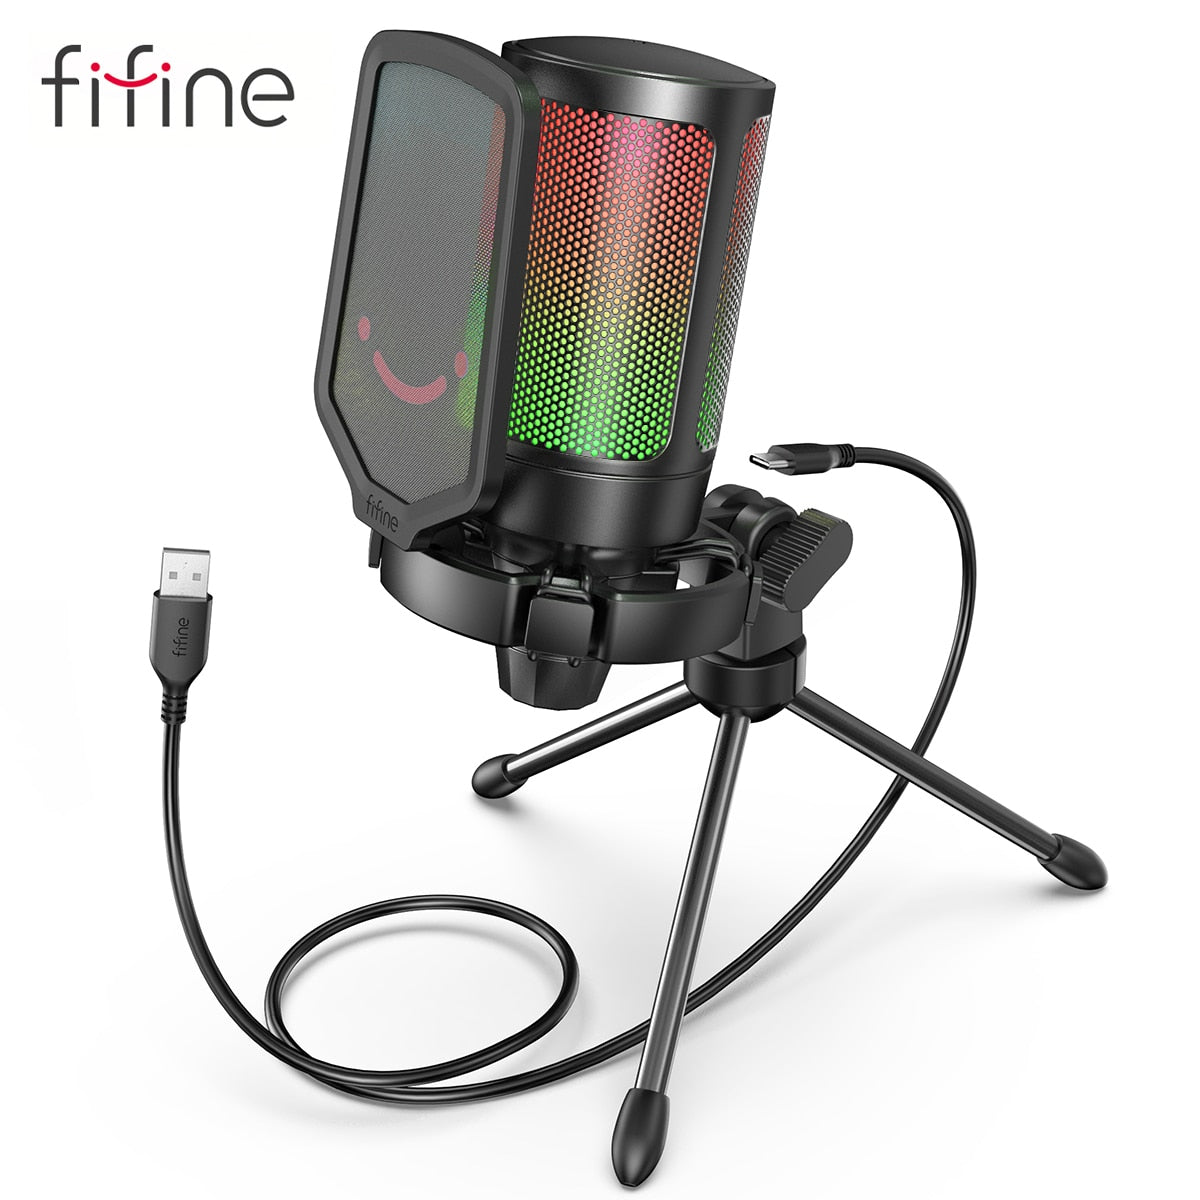 FIFINE USB Condenser Gaming Microphone, for PC PS4 PS5 MAC with Pop Filter Shock Mount&amp;Gain Control for Podcasts ZopiStyle